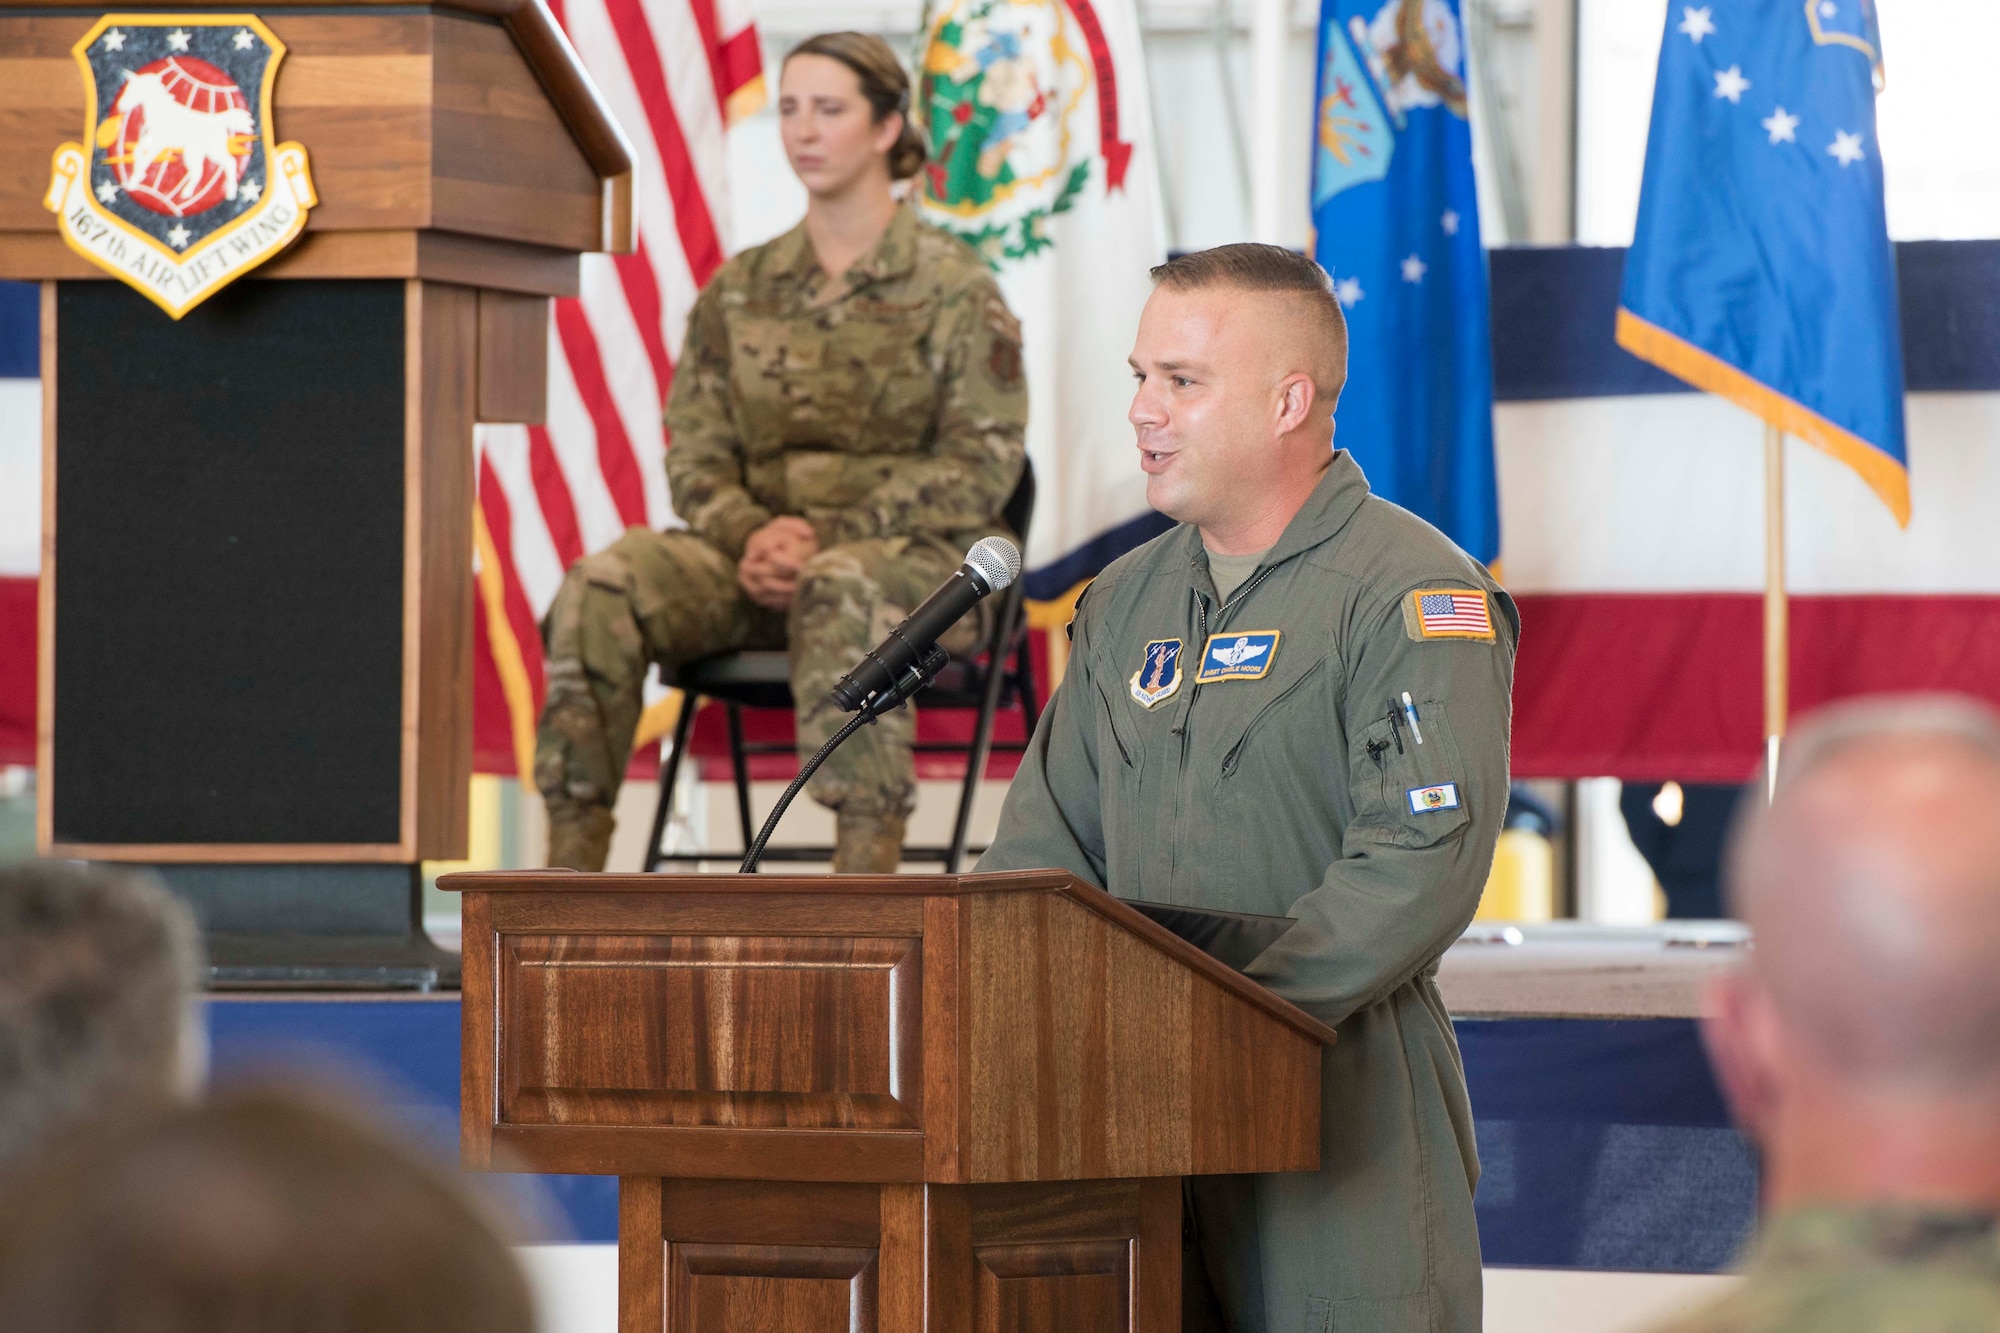 U.S. Air Force Senior Master Sgt. Charlie Moore, 167th Operations Group loadmaster, delivers a eulogy for Lt. Col. Barry Rowekamp, during a memorial service held at the 167th Airlift Wing, Martinsburg, West Virginia, Aug. 19, 2021. Rowekamp, the wing’s chief of aerospace medicine, passed on Aug. 6. (U.S. Air National Guard photo by Senior Master Sgt. Emily Beightol-Deyerle)